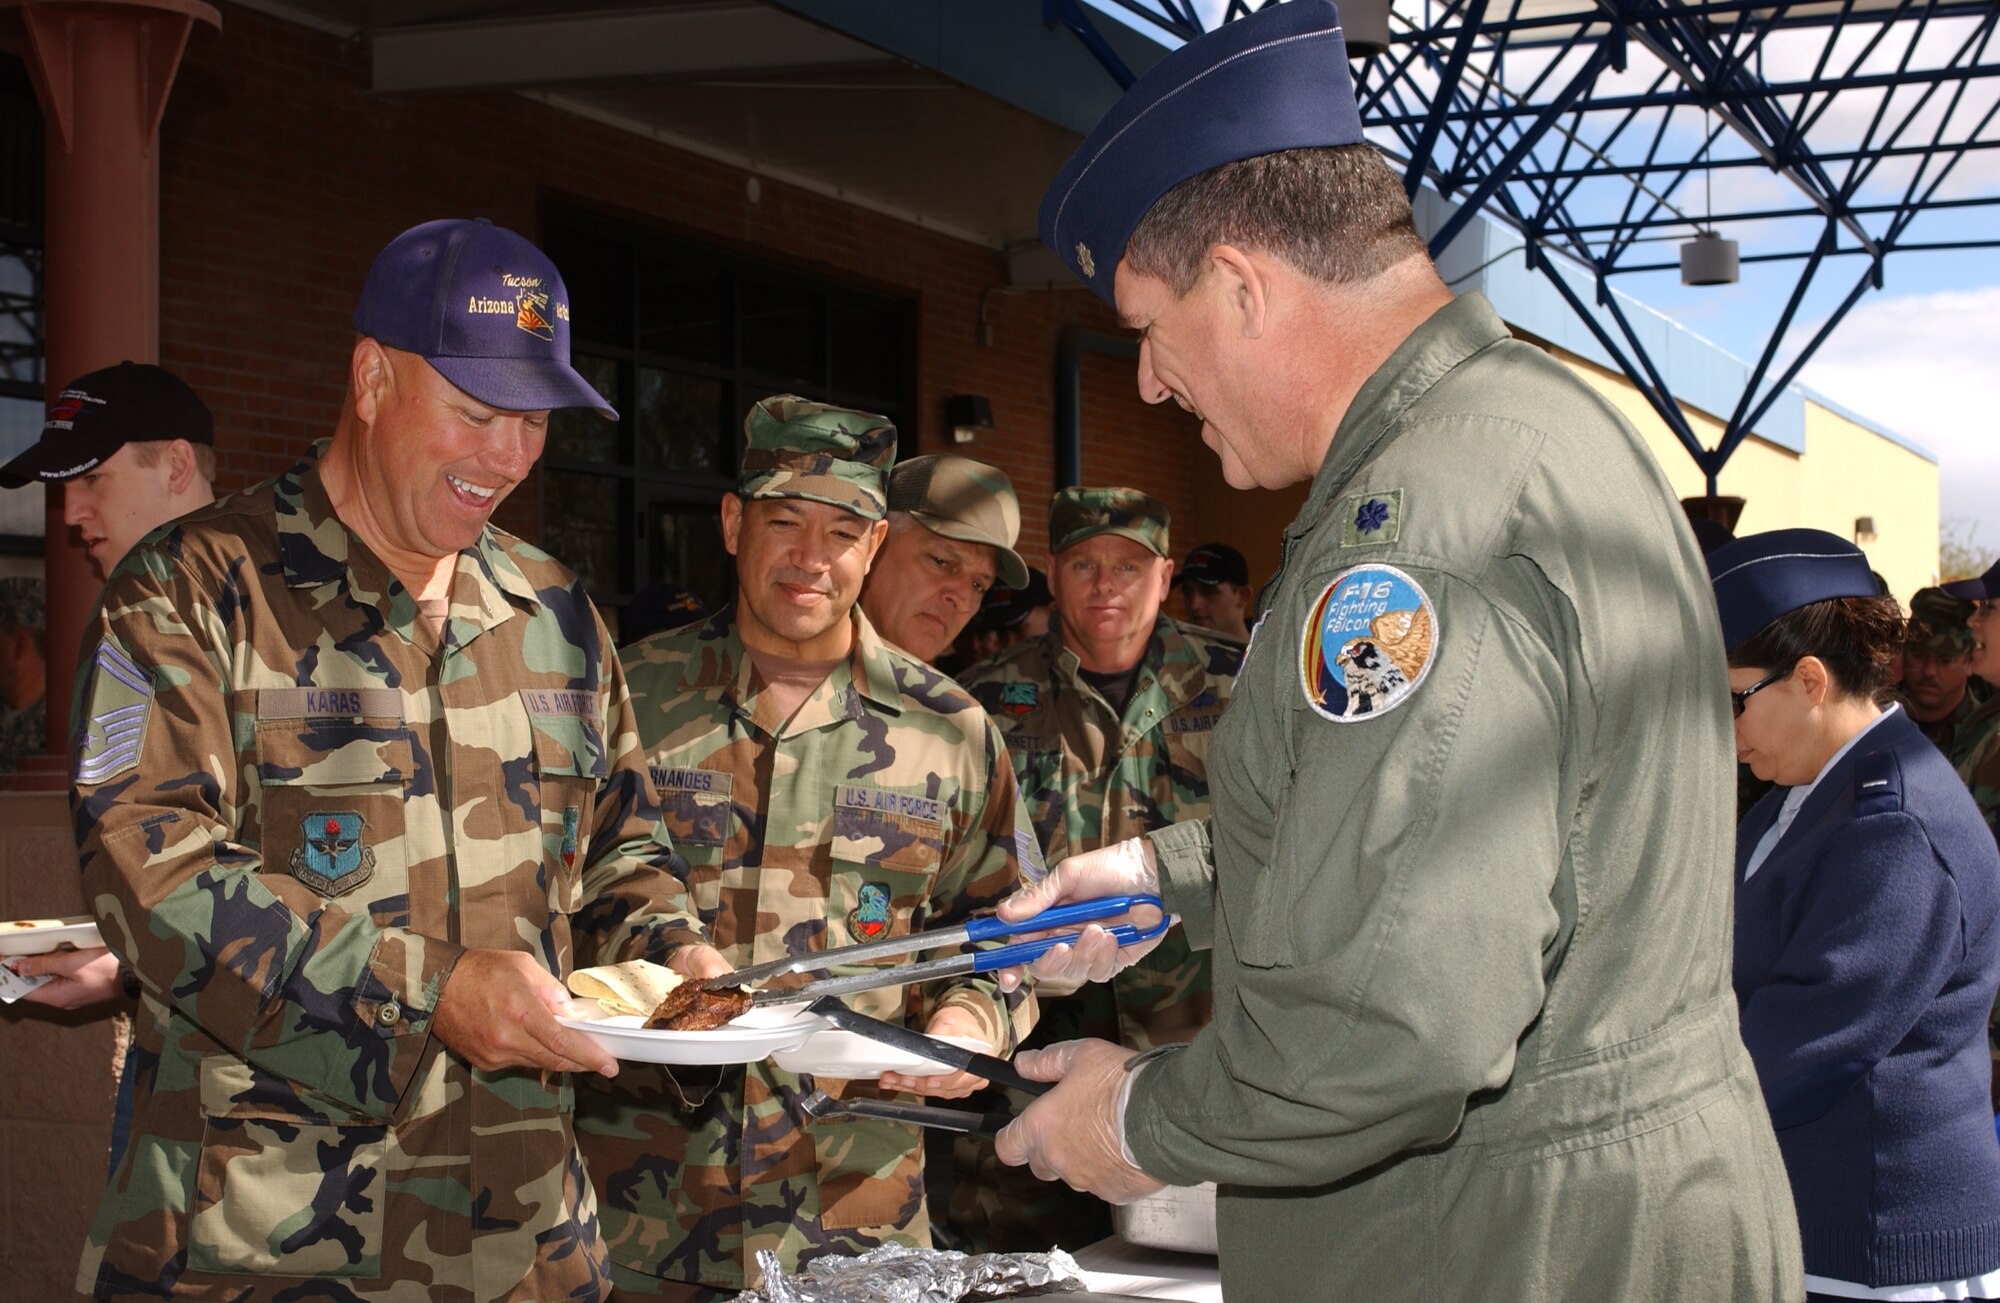 Lt. Col. Mitch Rebman serves a steak to Senior Master Sgt. Brian Karas. This year’s Steak Fry event was the most highly attended in wing history. At 947 served, the event exceeded last year’s participation by about 300 members. (Air National Guard photo by Senior Airman Sara Elliott)